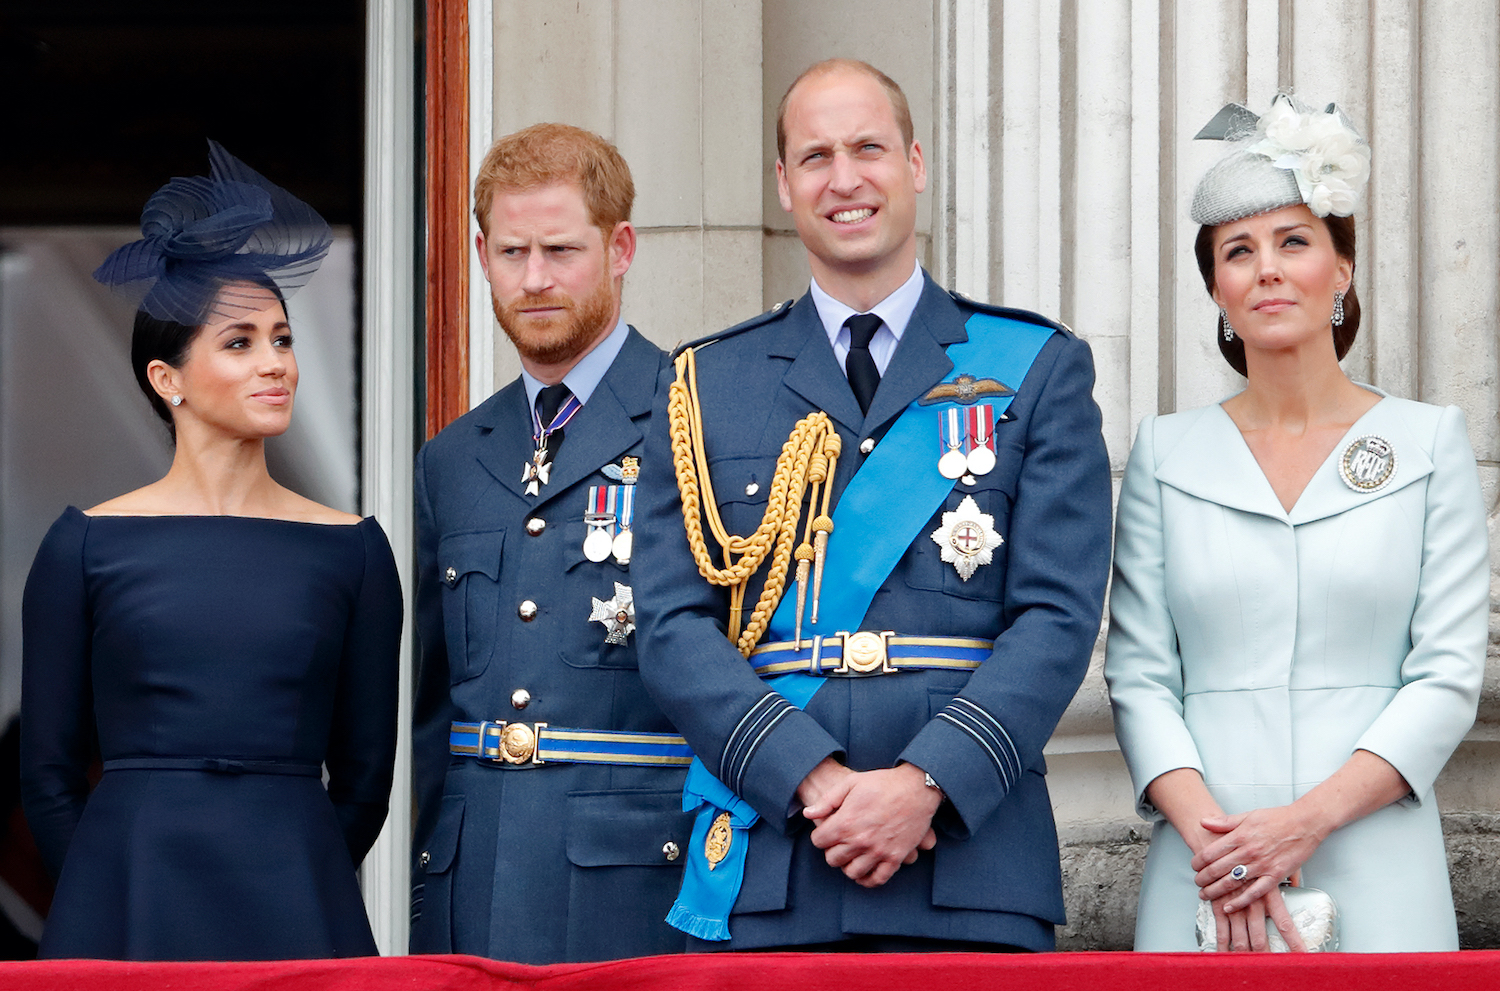 Meghan Markle, Prince Harry, Prince William, and Kate Middleton stand on Buckingham Palace balcony together with Harry looking sad